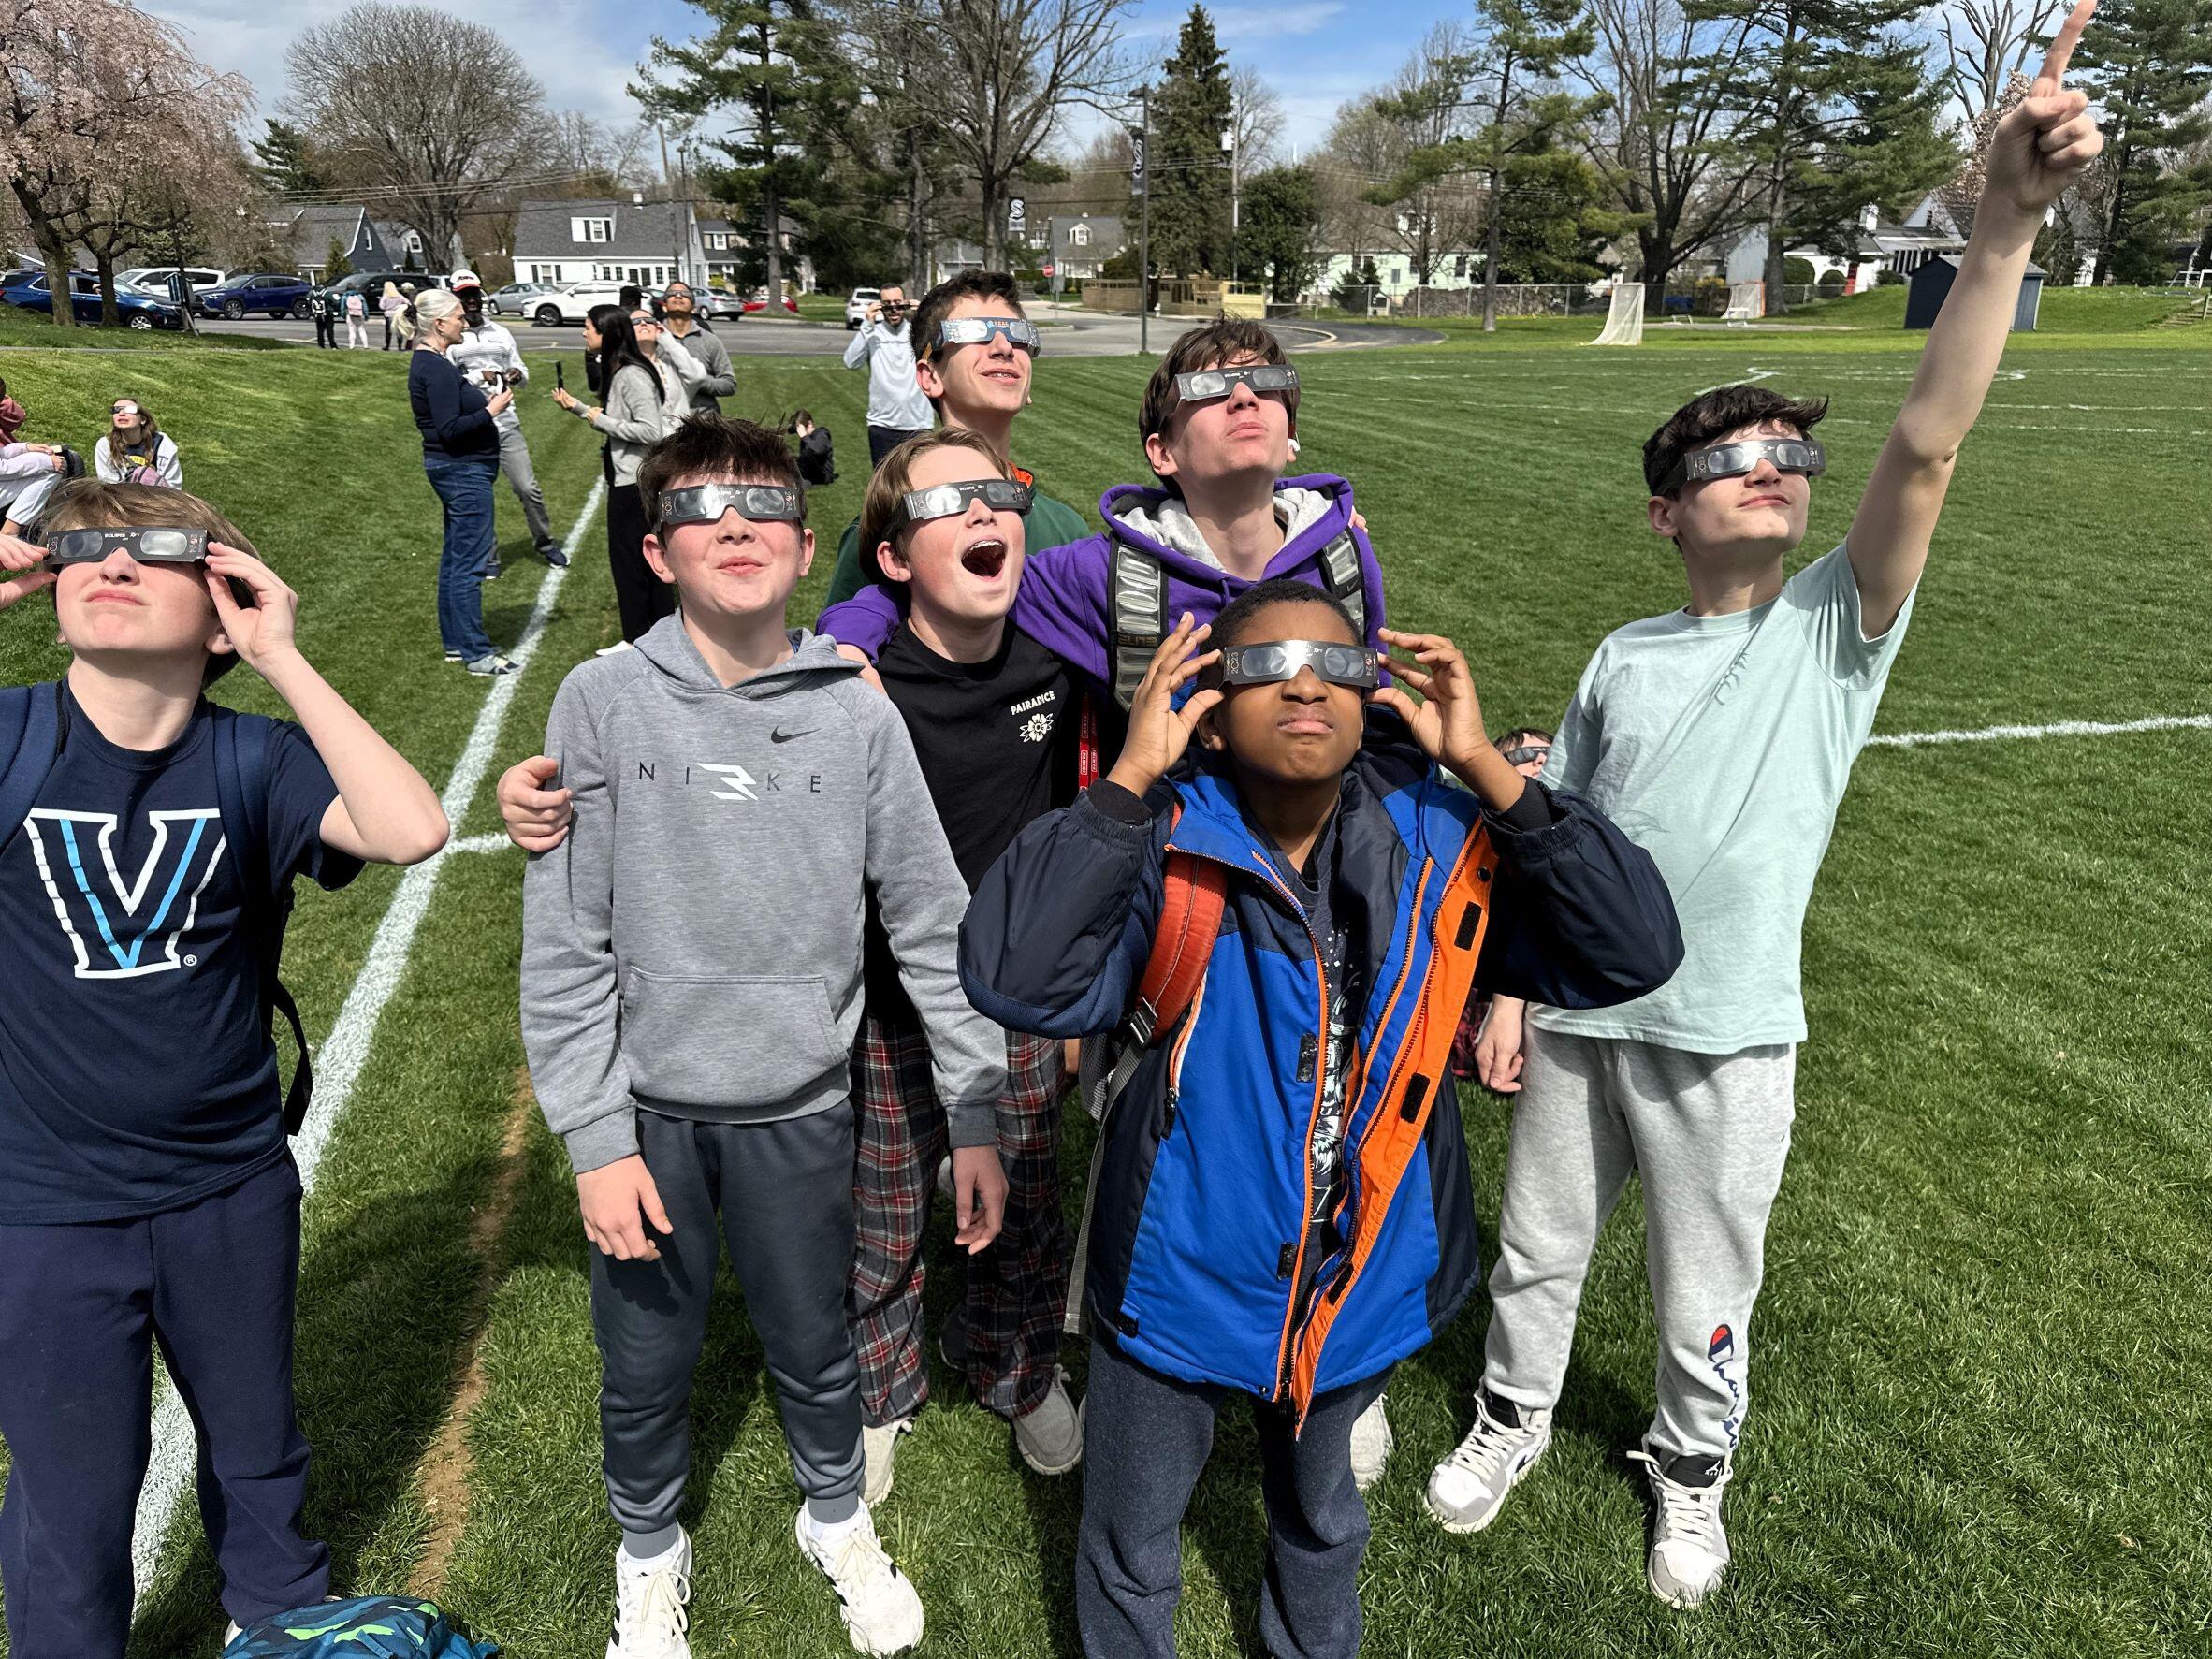 A group of 7 boys standing in a field looking up at the sun, all wearing eclipse glasses. One is pointing up at the sun